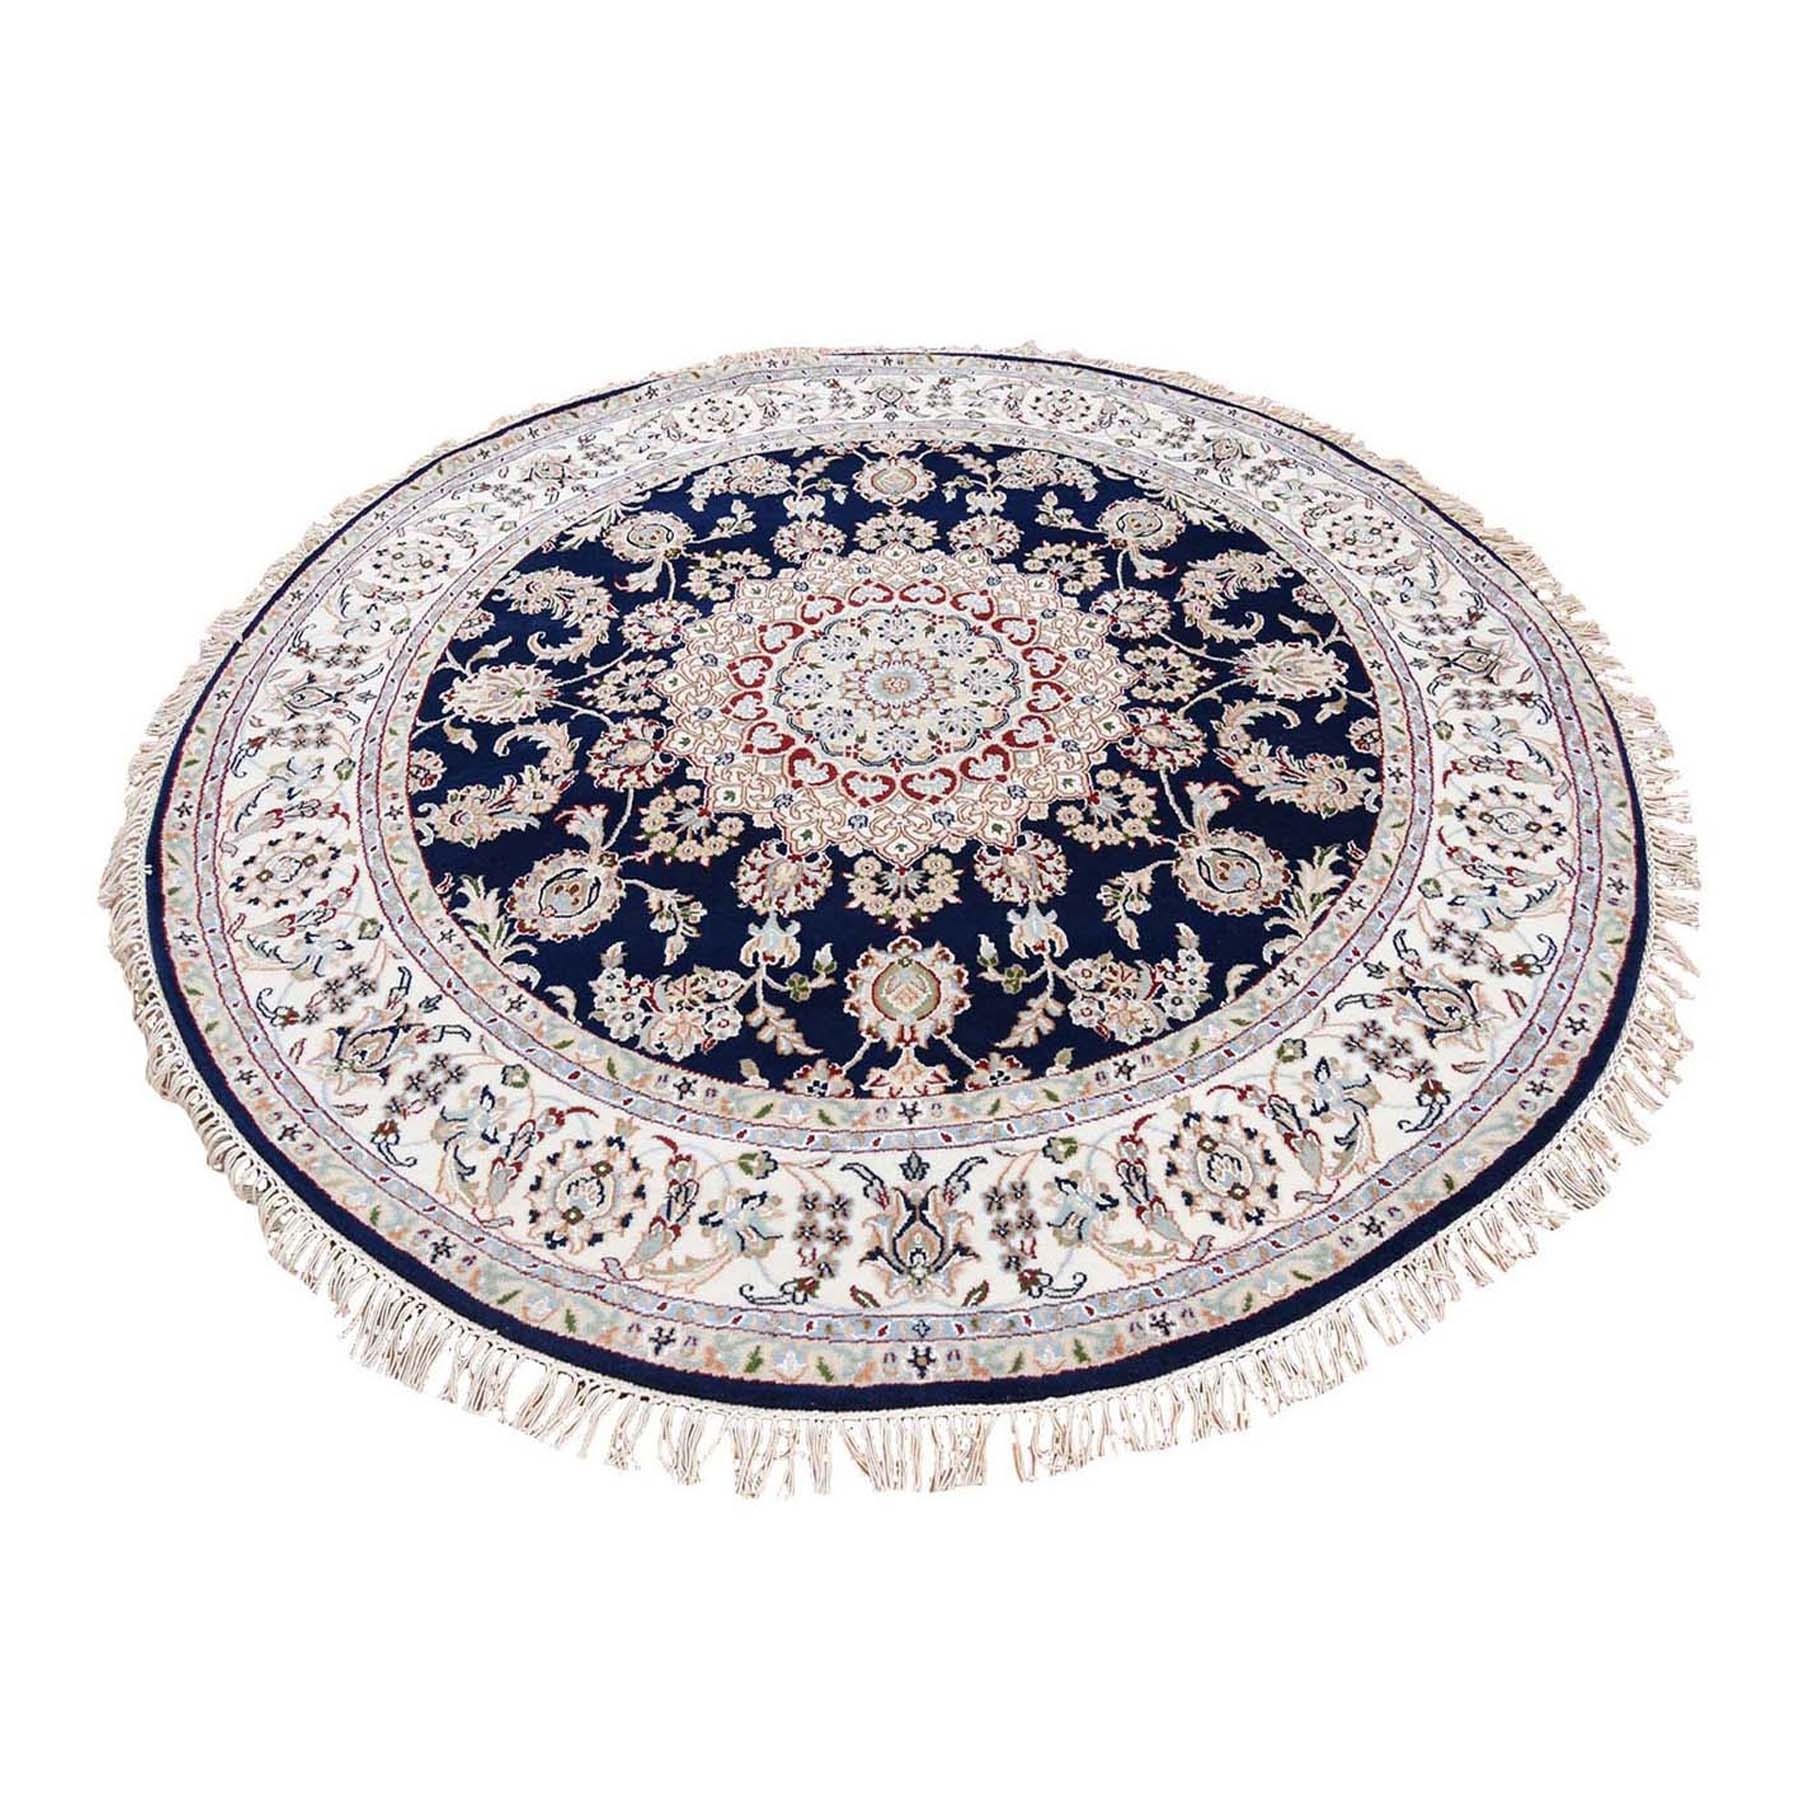 Midnight Blue Nain with Center Medallion Flower Design Pure Wool 250 KPSI Hand Knotted Round Oriental Rug